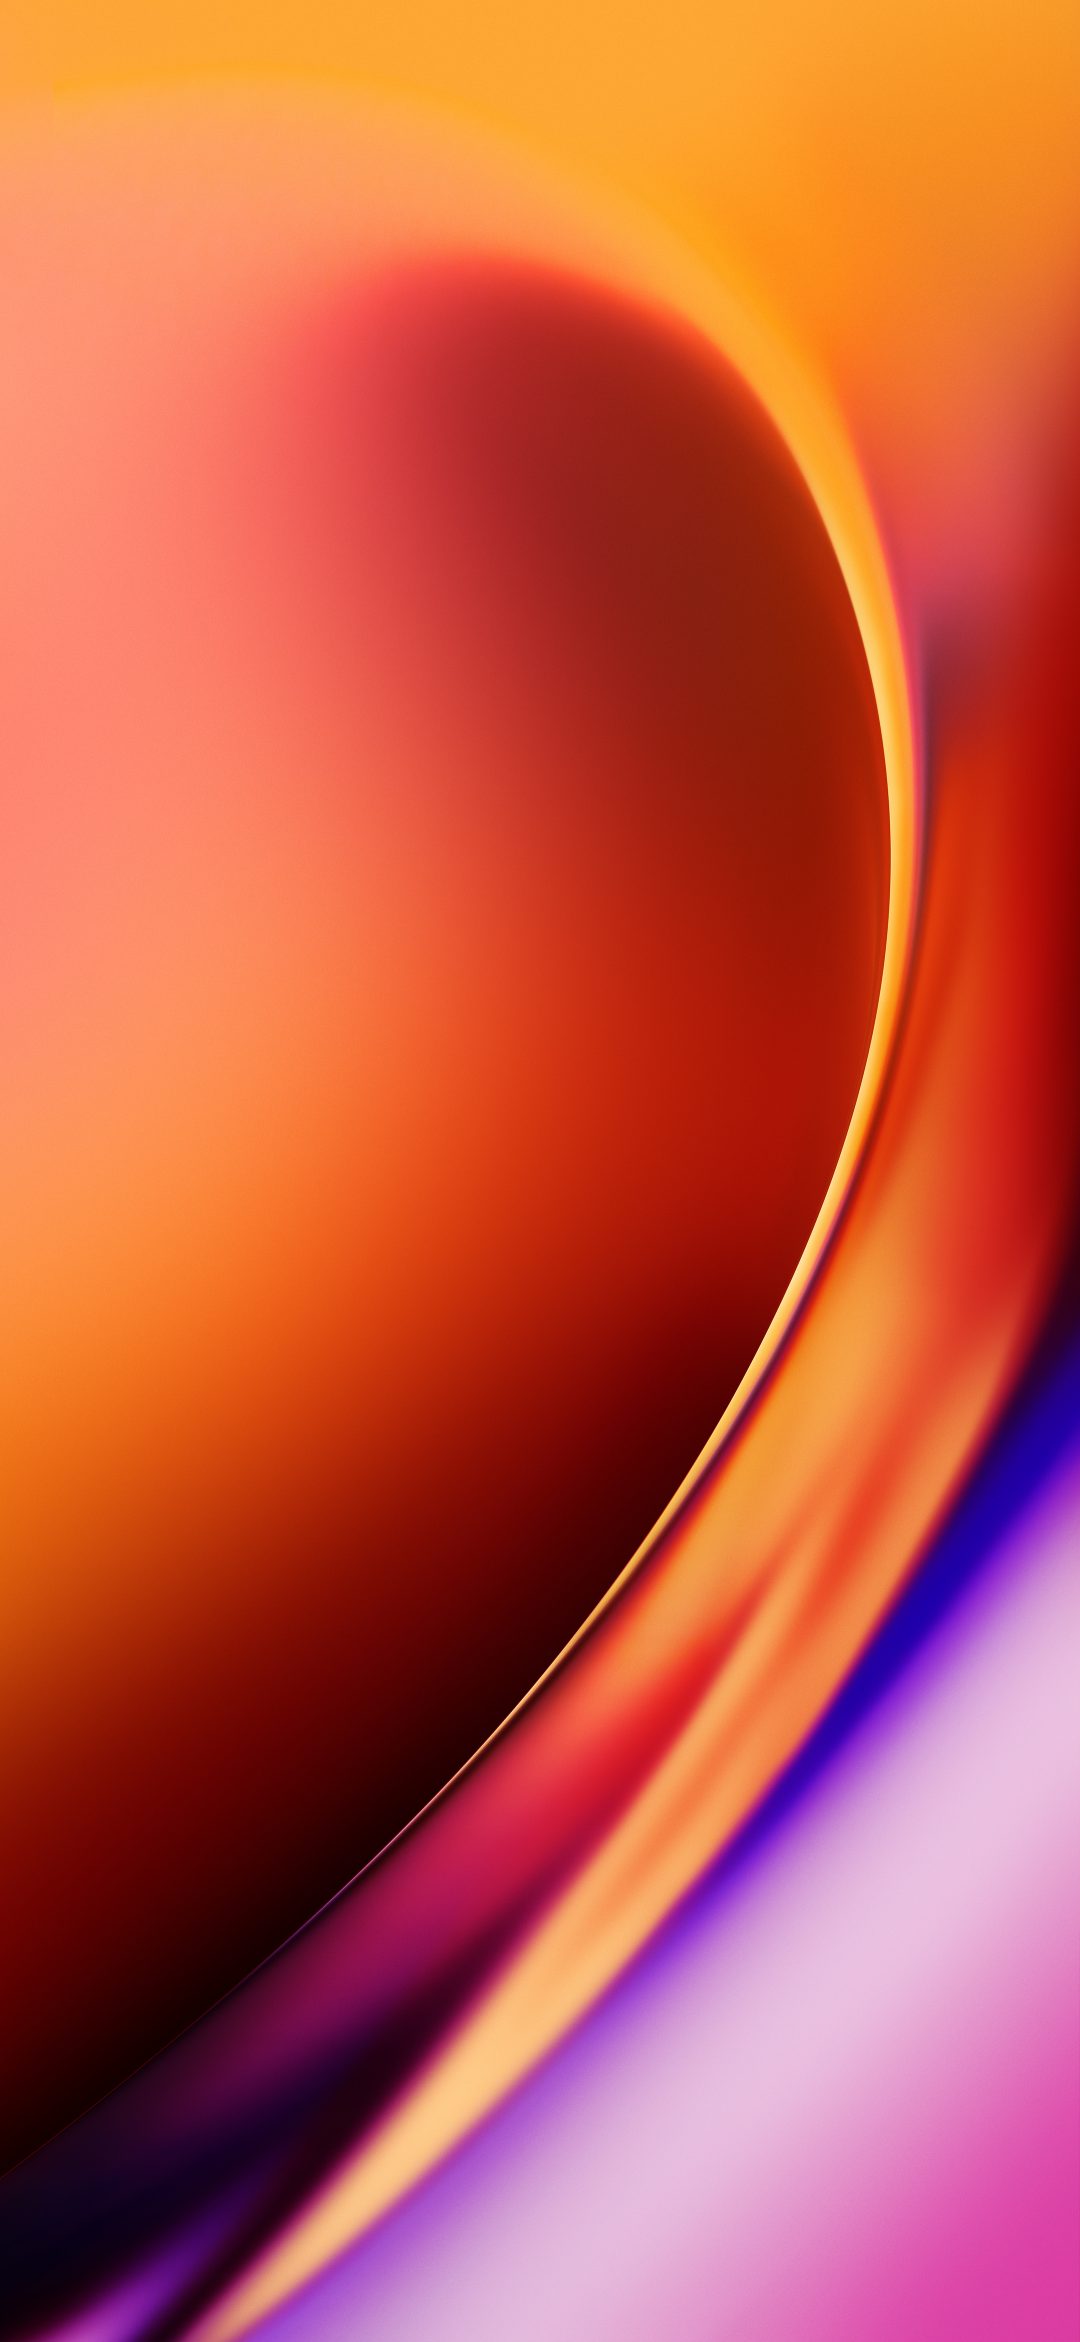 OnePlus 7T Wallpapers & Live Wallpapers (4K, Never Settle) - DroidViews